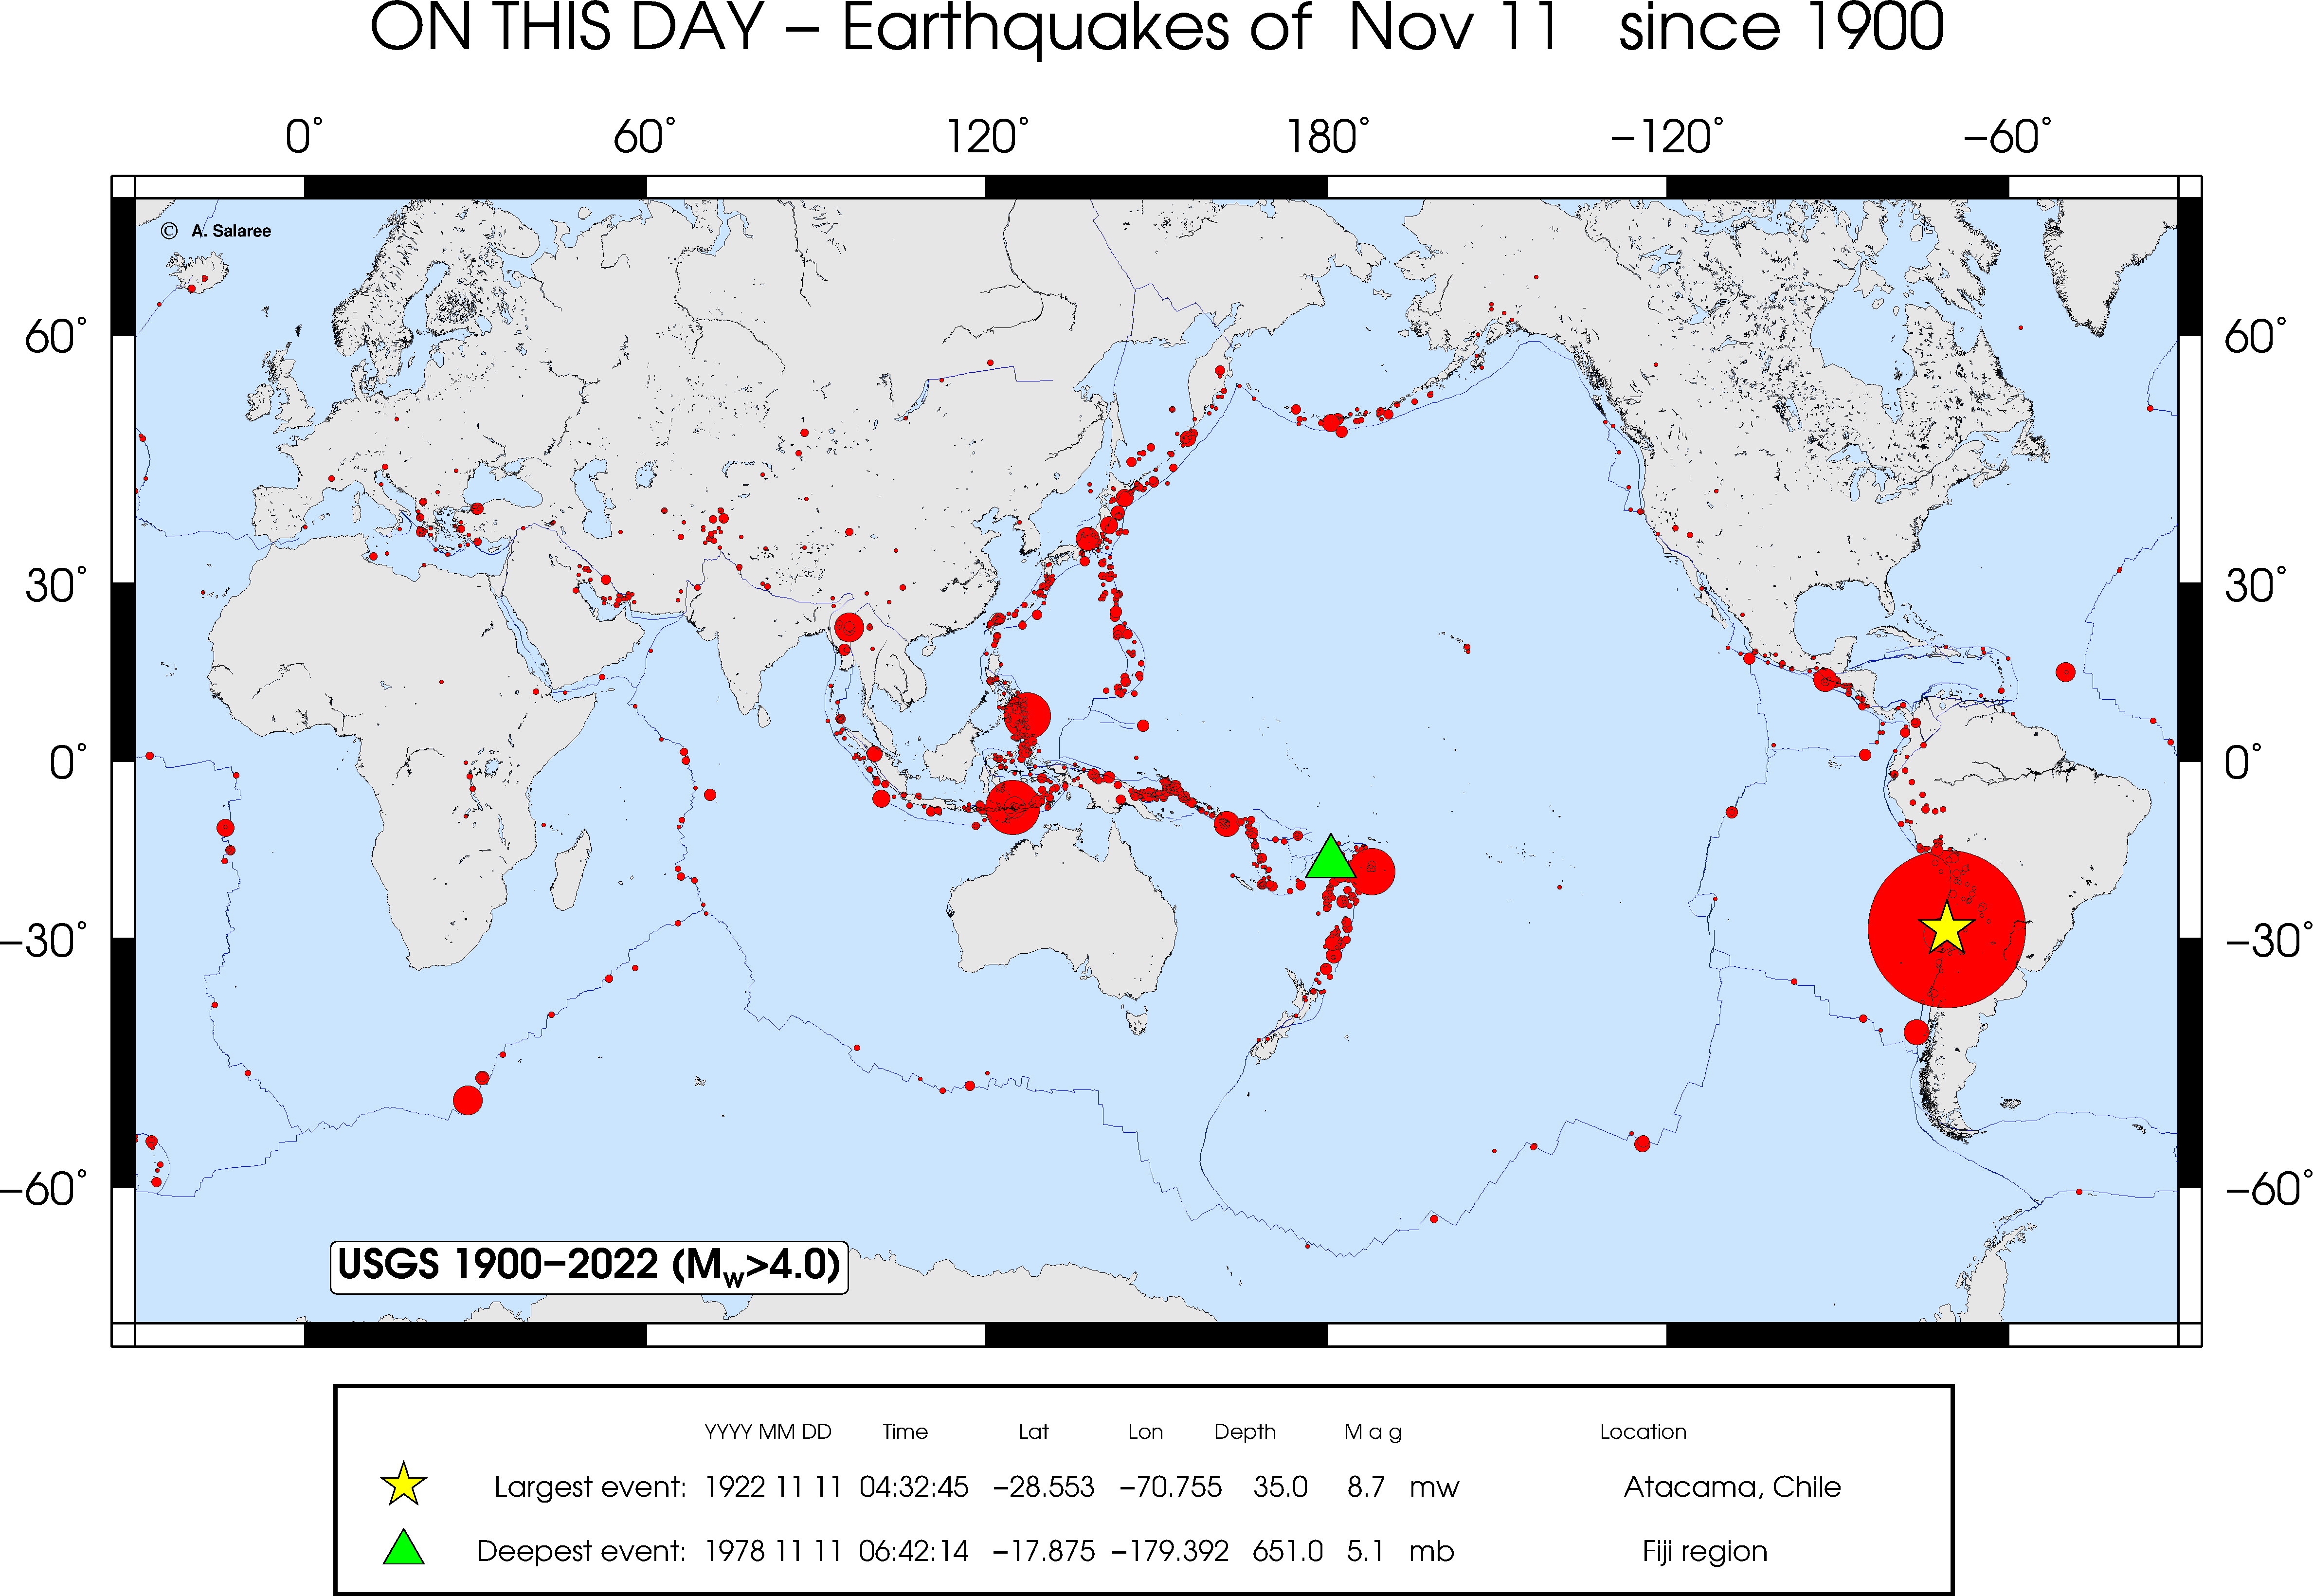 Earthquakes on this day